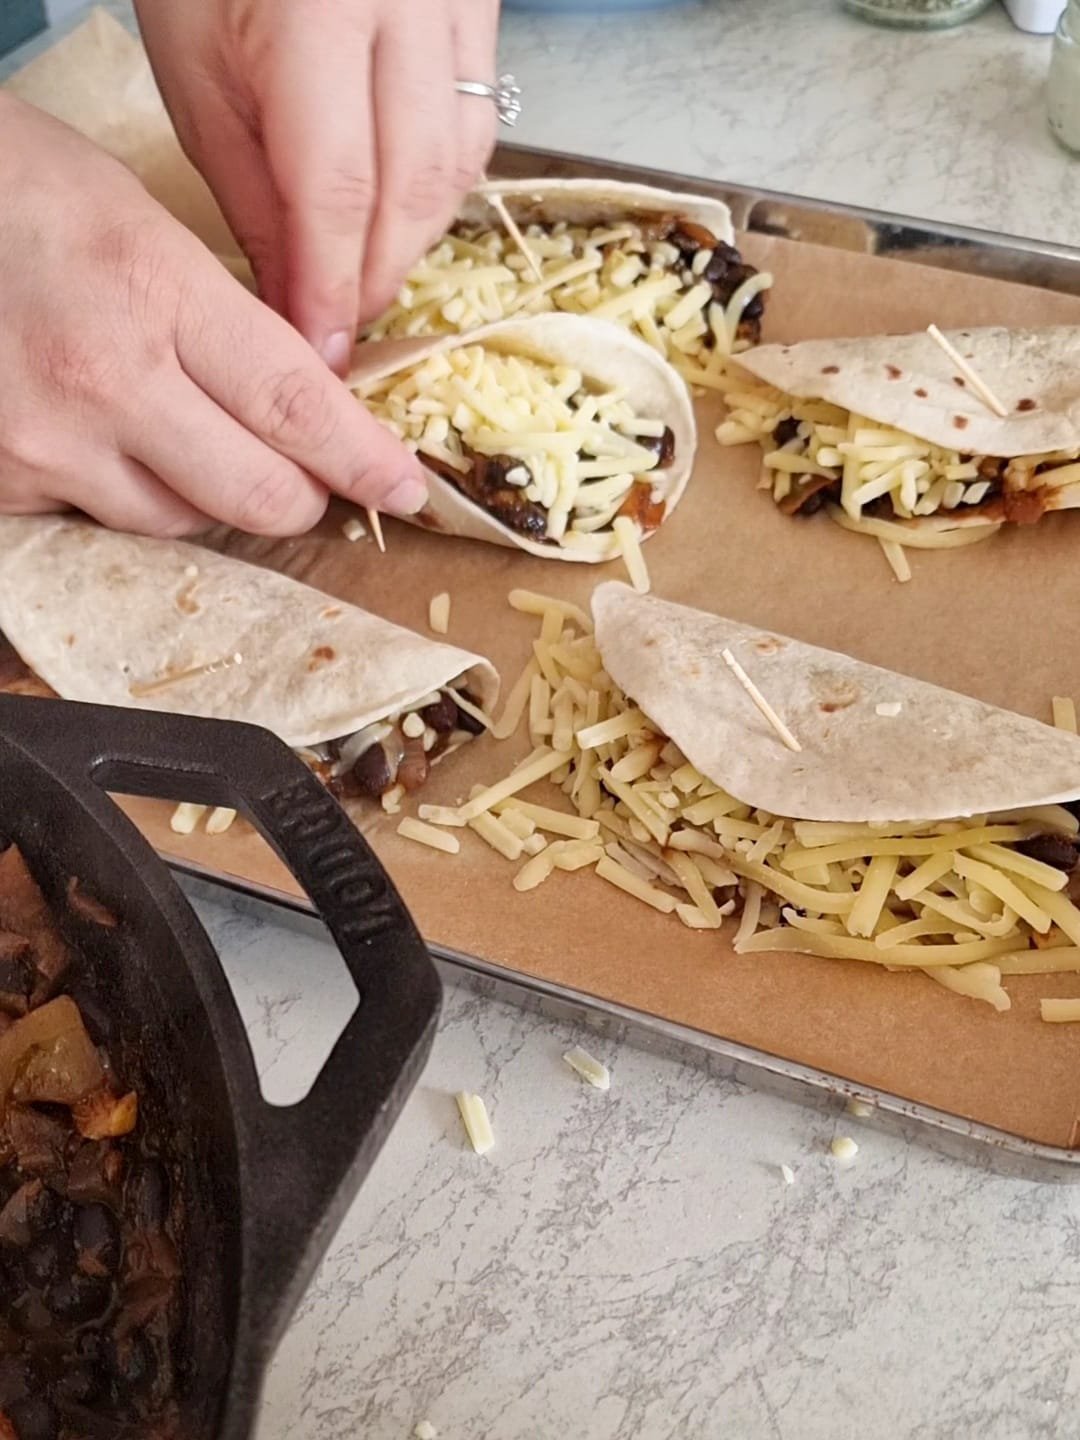 Fill the tacos with 2 tablespoons to mixture each.  Fill the remaining space with cheddar and fold them over. 